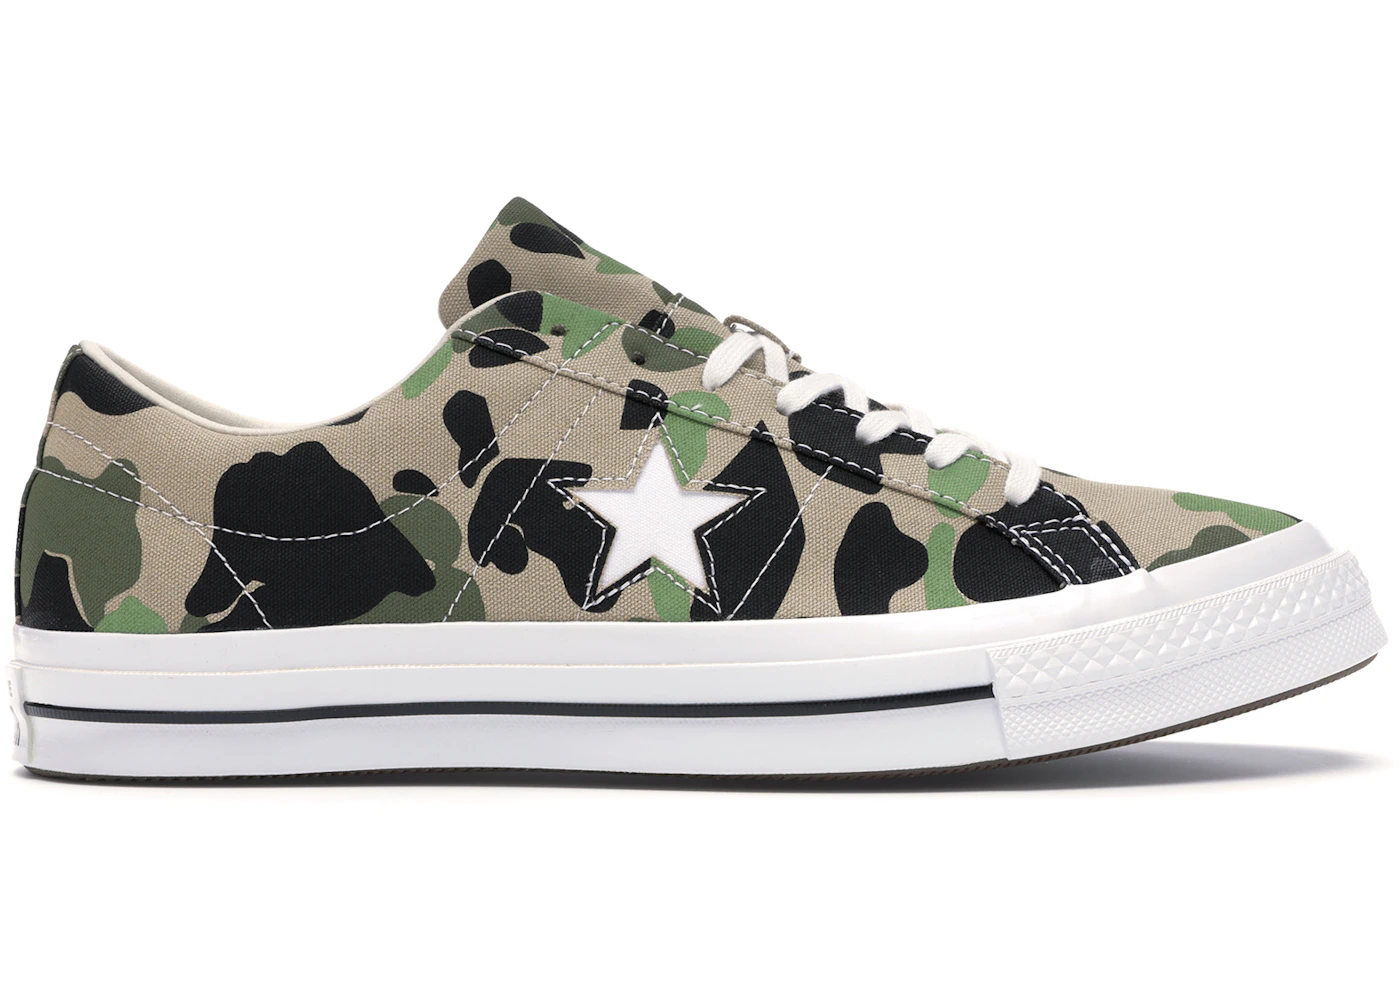 Converse One Star Ox Duck - 165027C - US